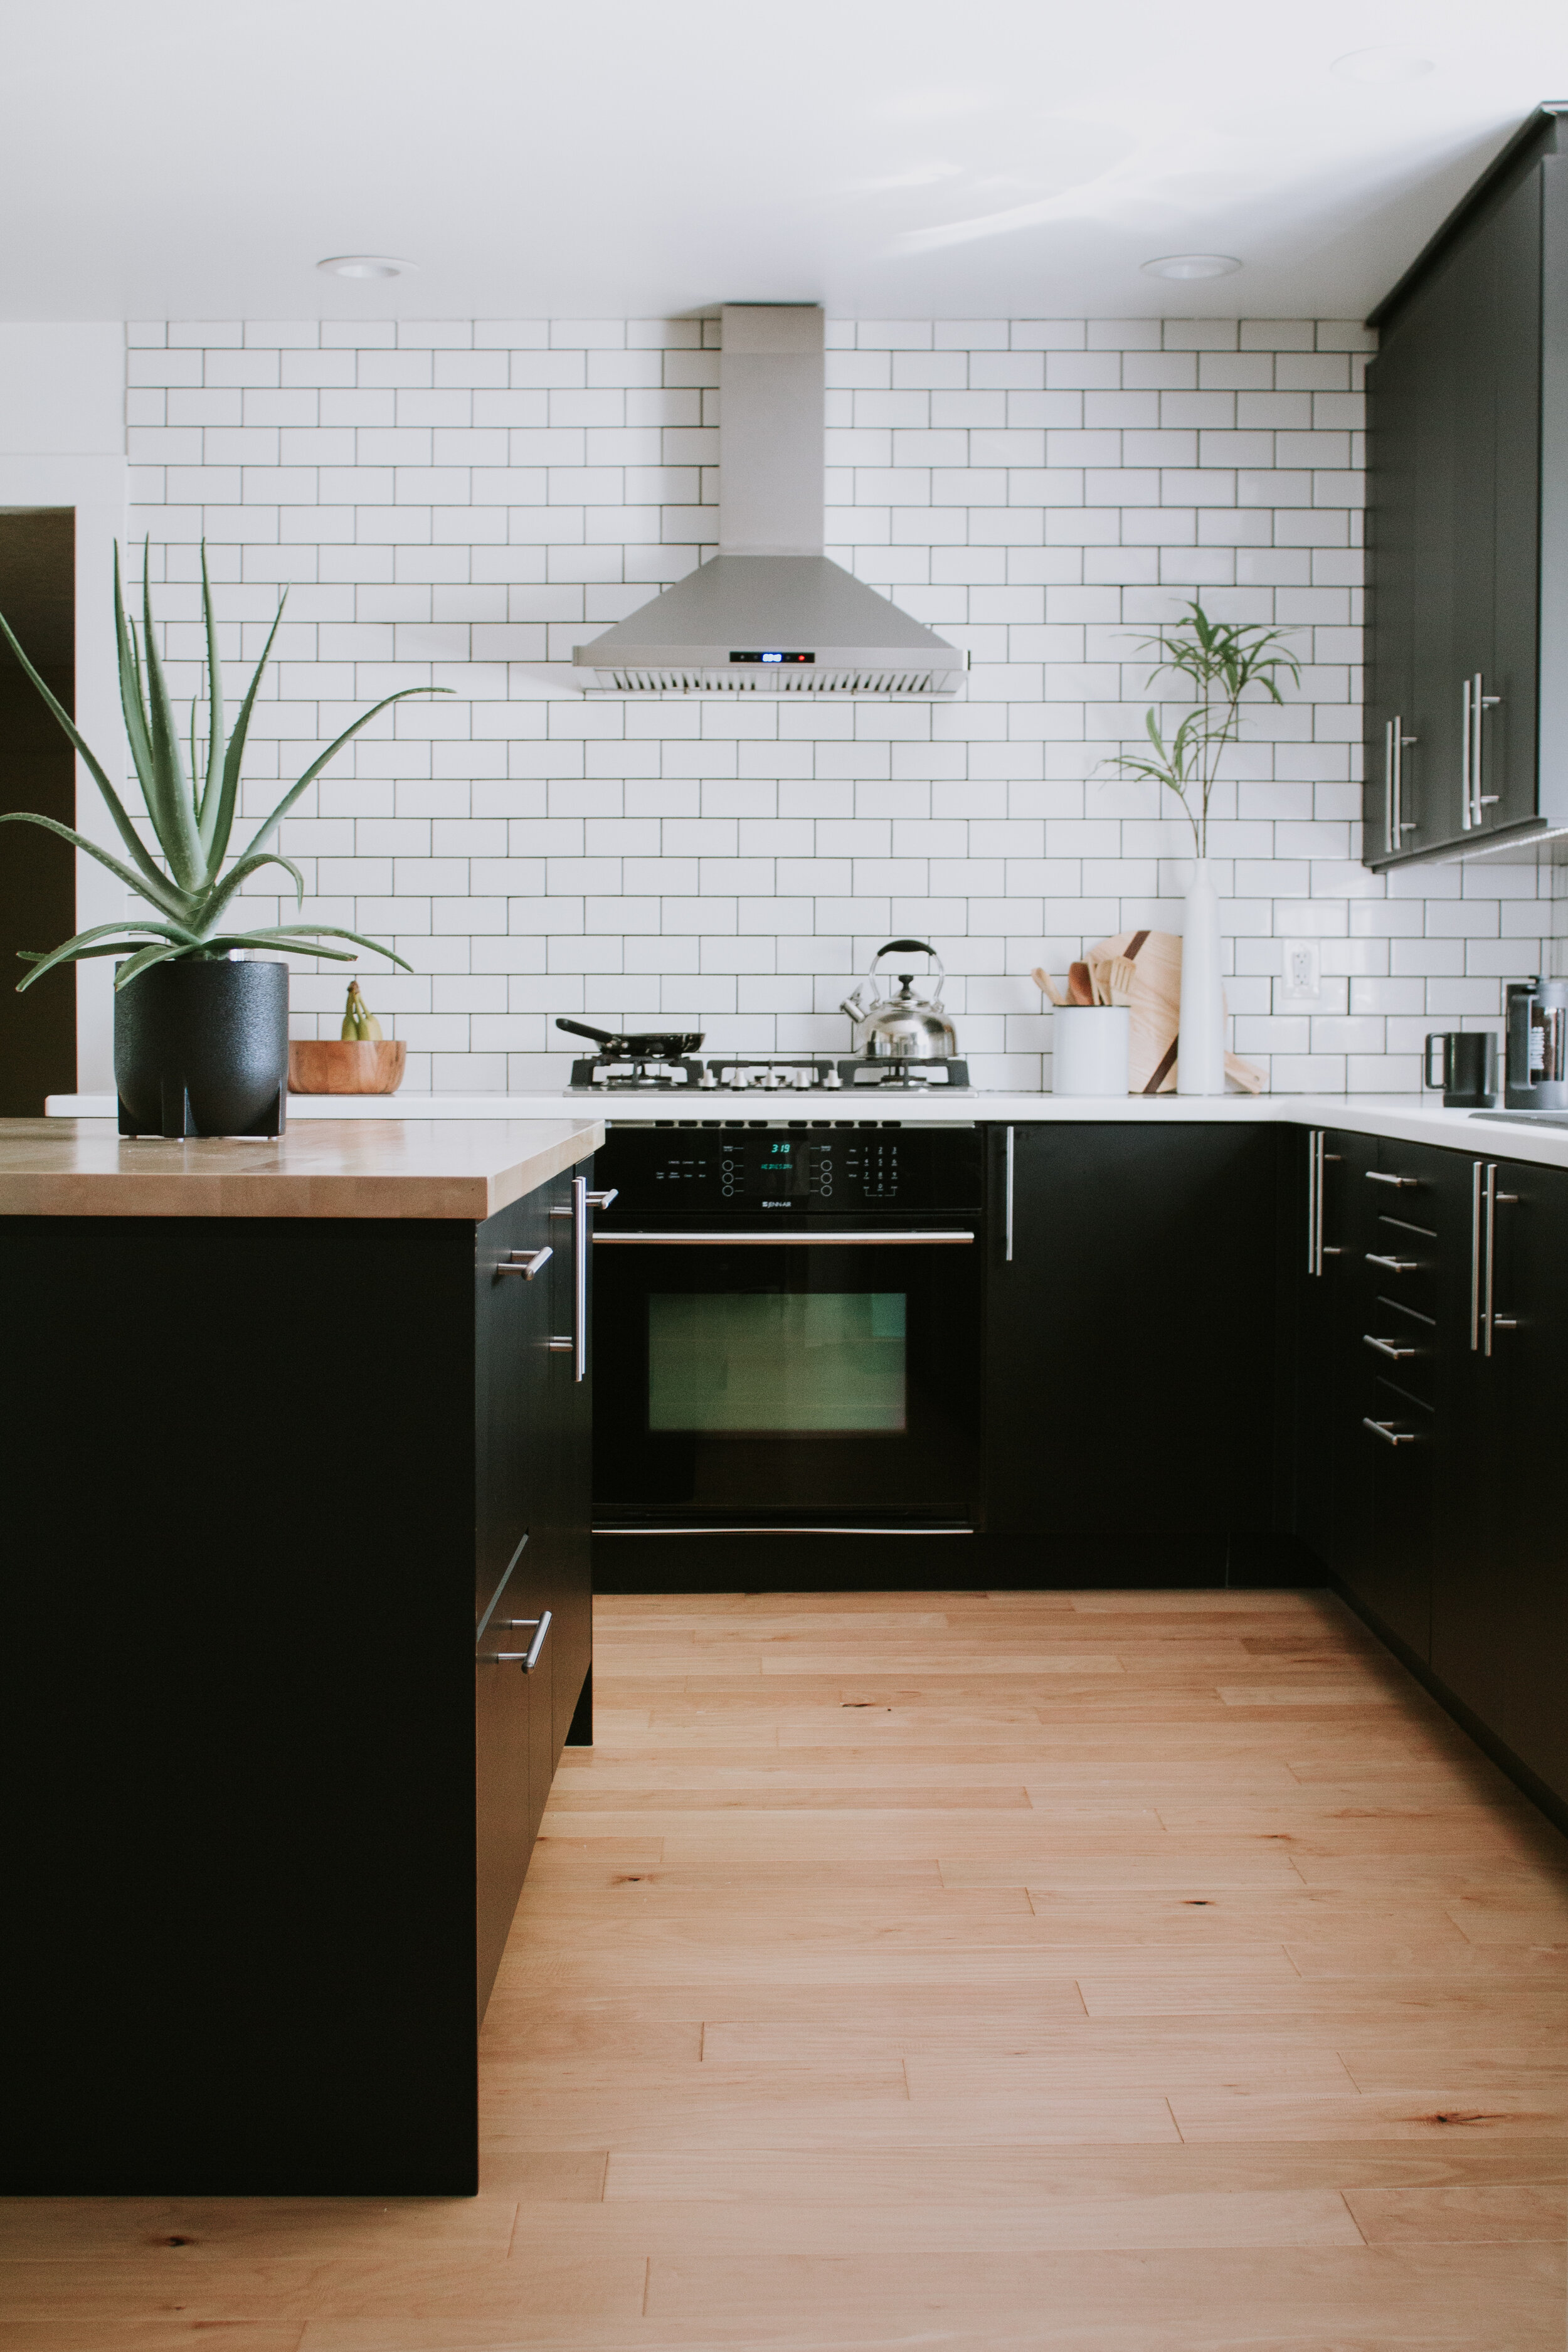 10 home features we couldn't live without | Nadine Stay | Kitchen island with storage, built in microwave, transom windows above the interior doors, slide out trash can, dimmer switches, and a wood burning fireplace.